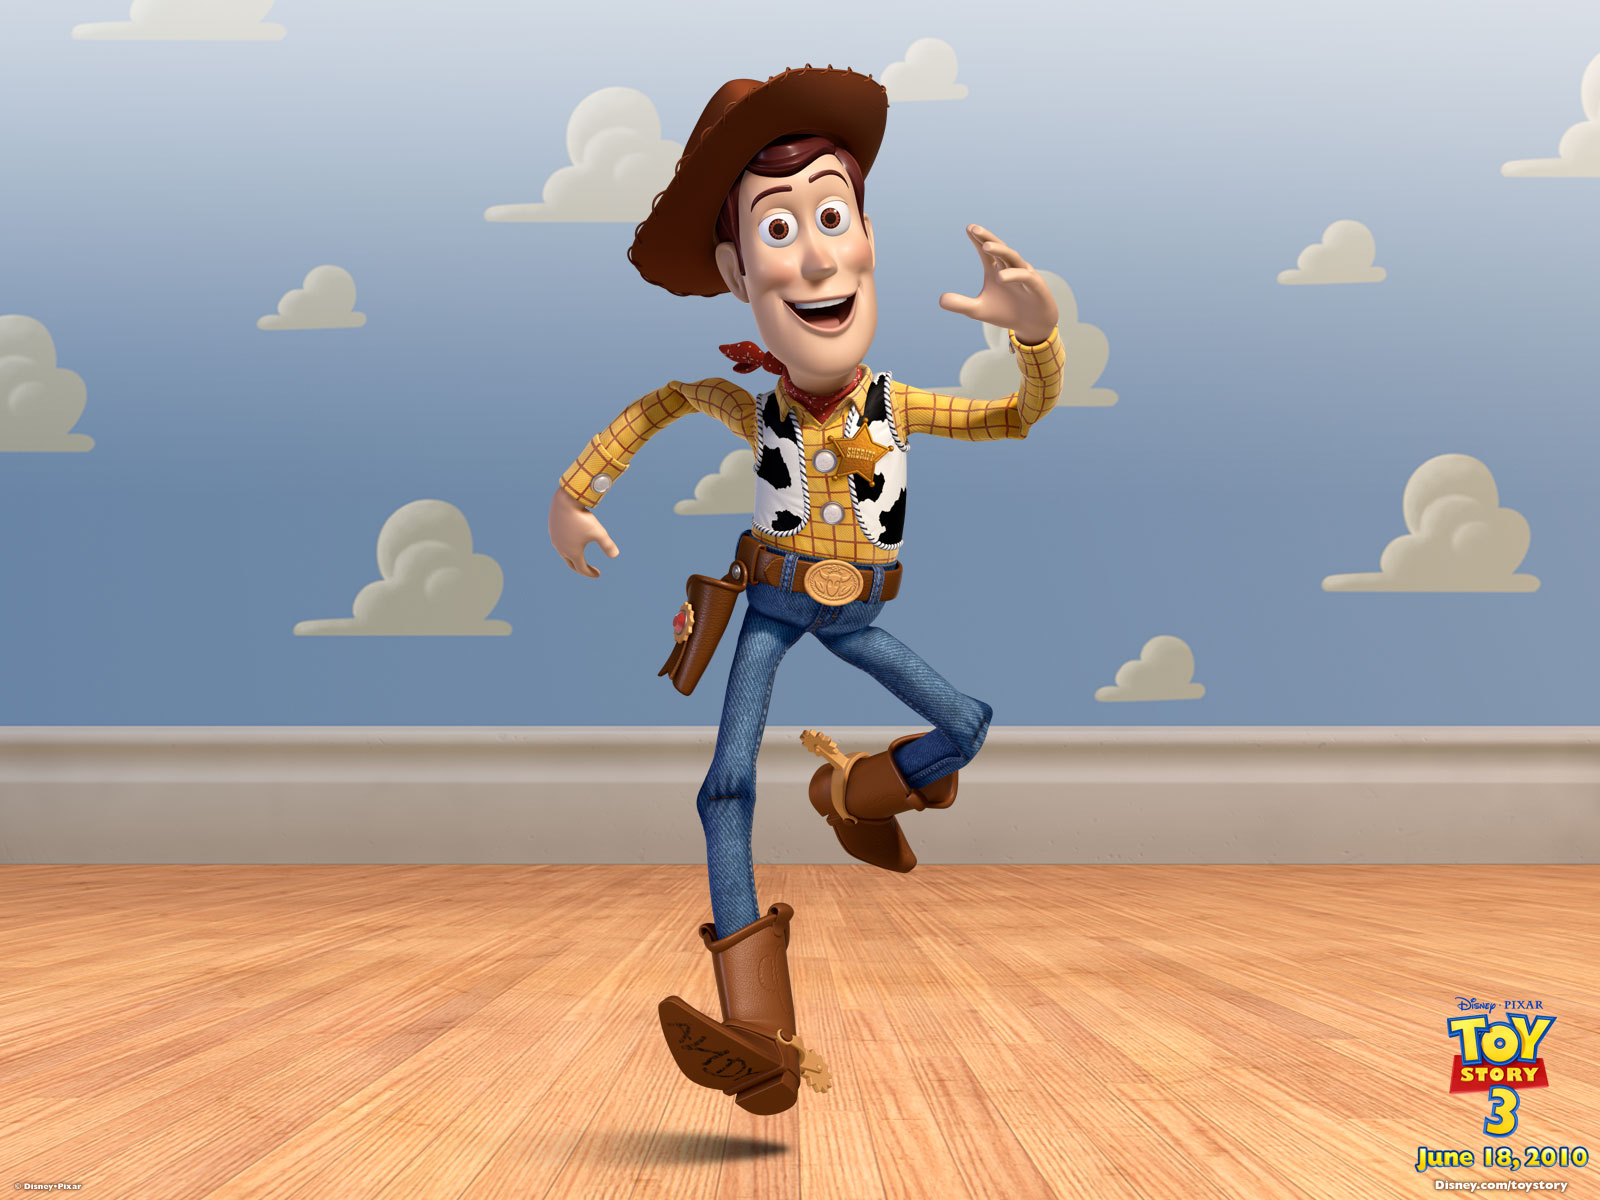 toy story 3 wallpaper woody and buzz